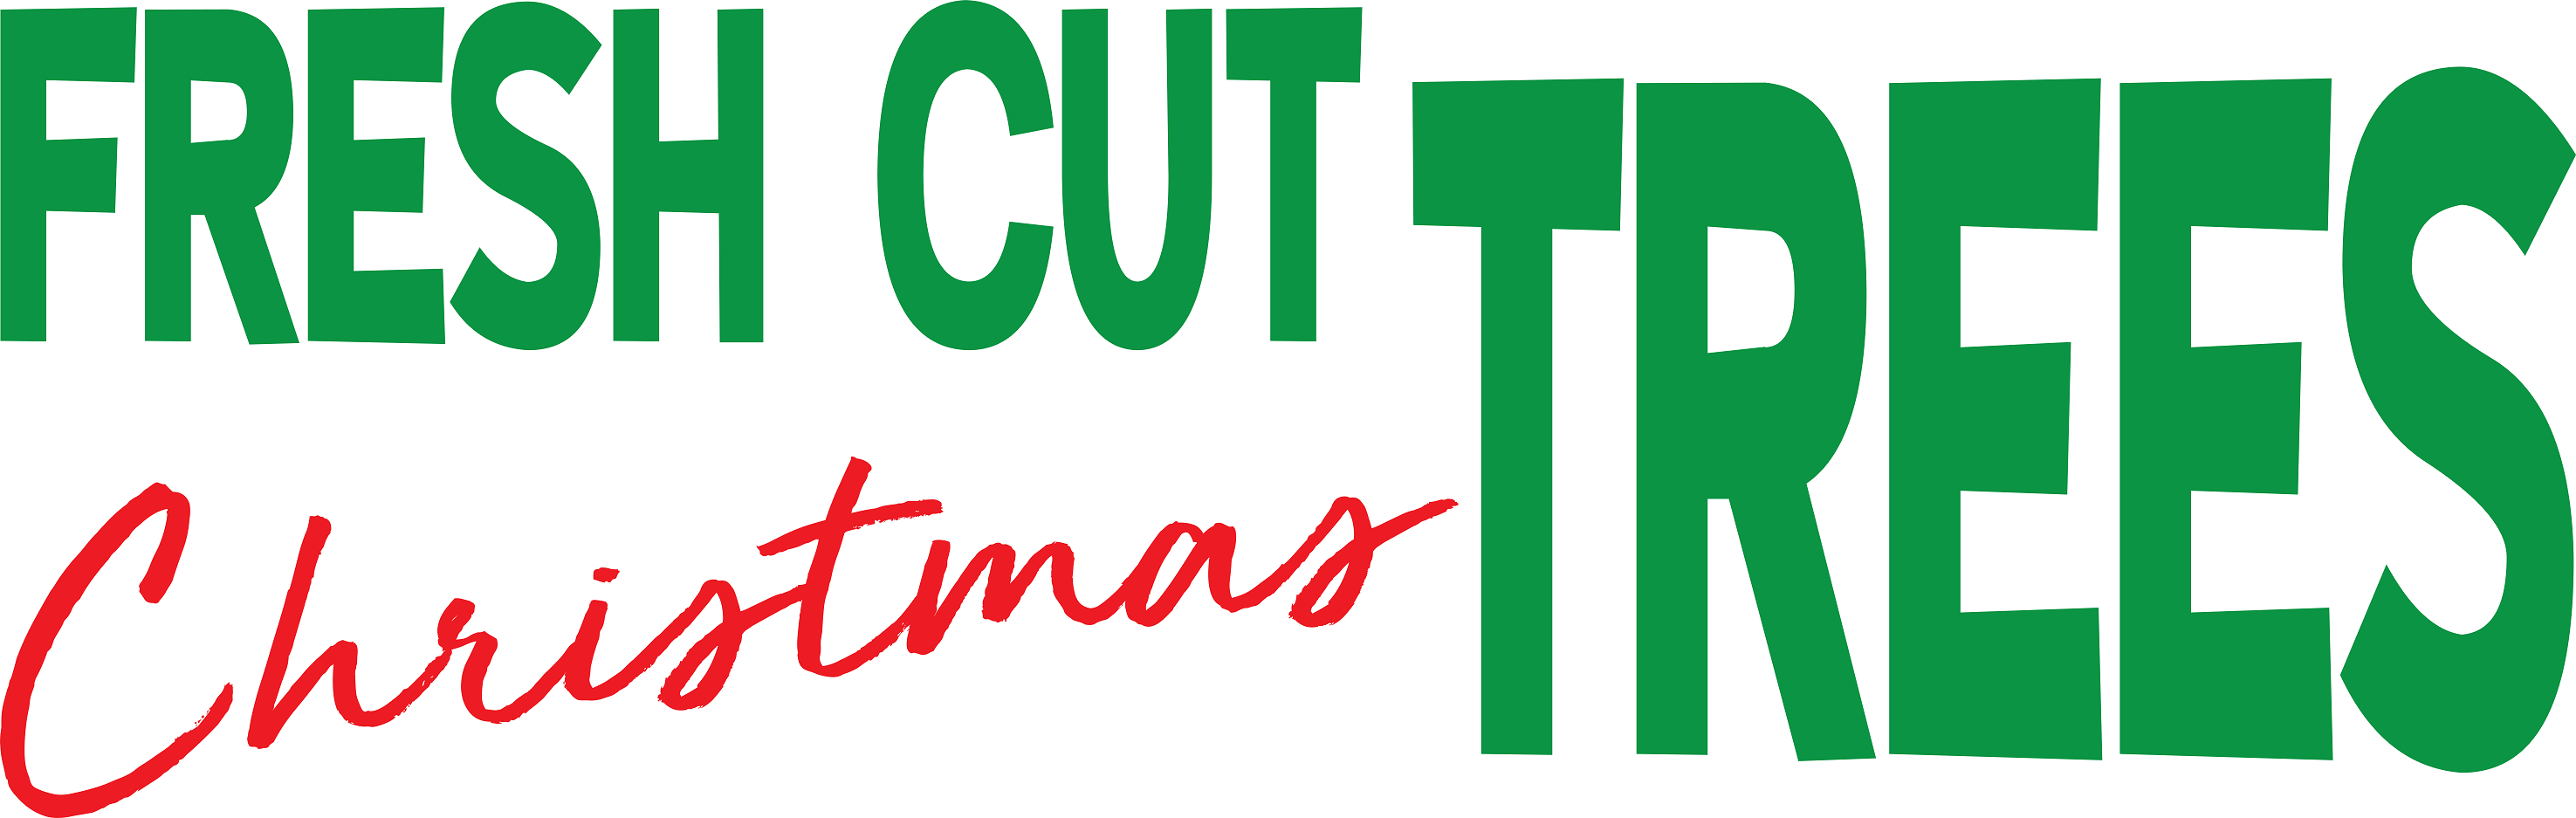 Banner - 3' X 8' Fresh Cut Christmas Trees Kirk Company - Premium Supplier  Of Christmas Trees and Christmas Tree Products